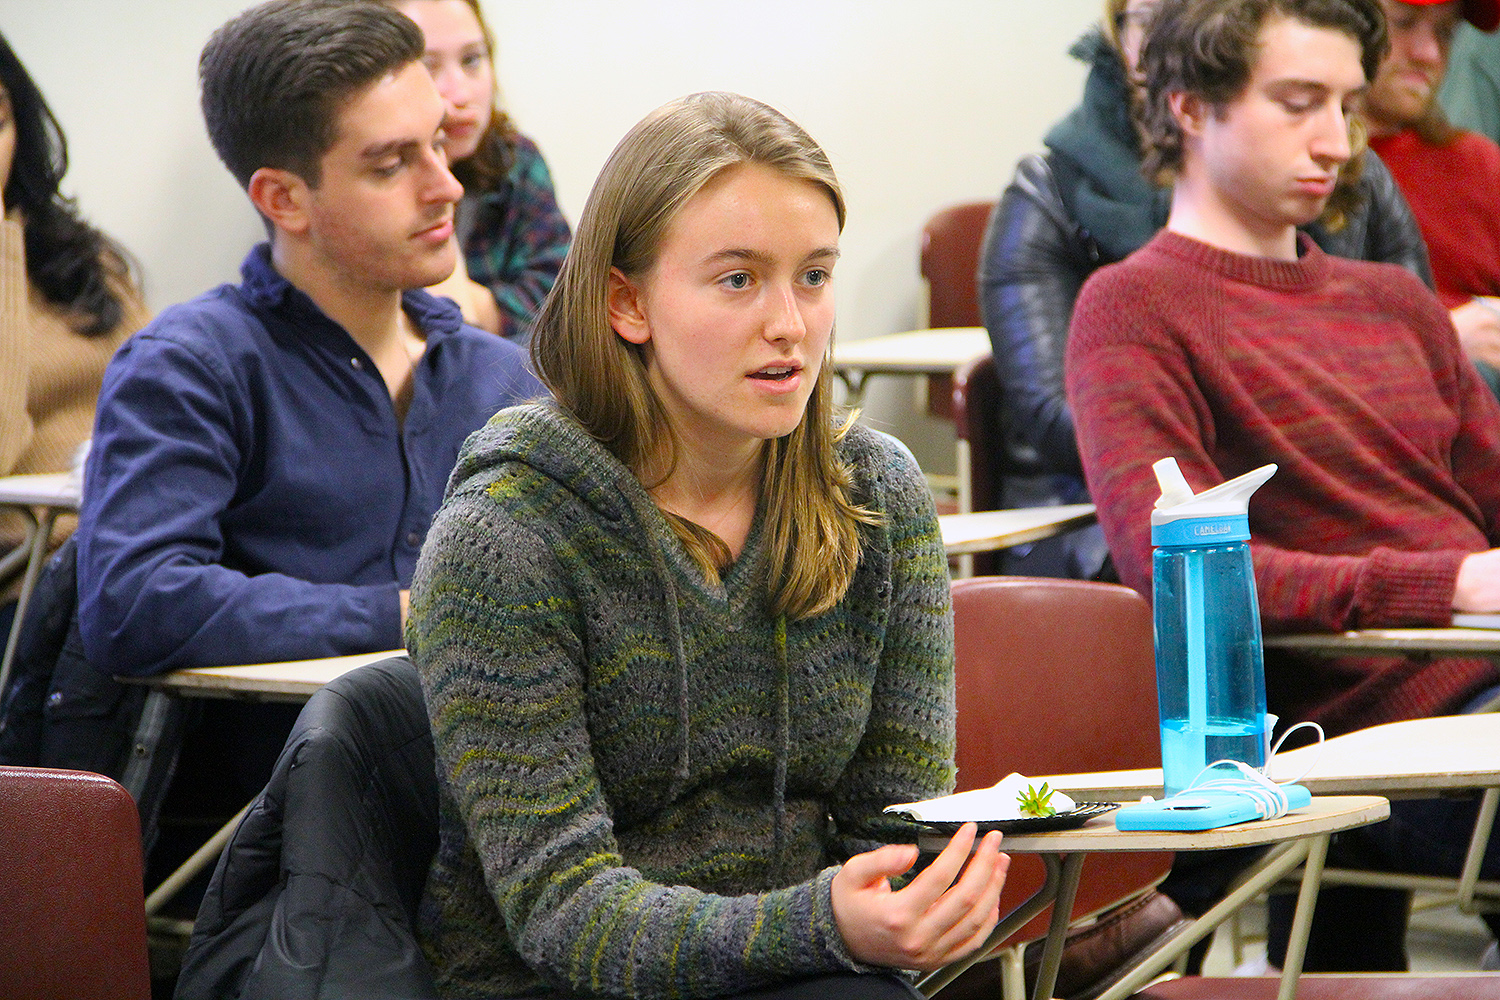 Students introduced topics such as the legitimacy of the Iowa caucus, the origins and effects of super-delegates, and the campaign prospects of Donald Trump and Bernie Sanders.